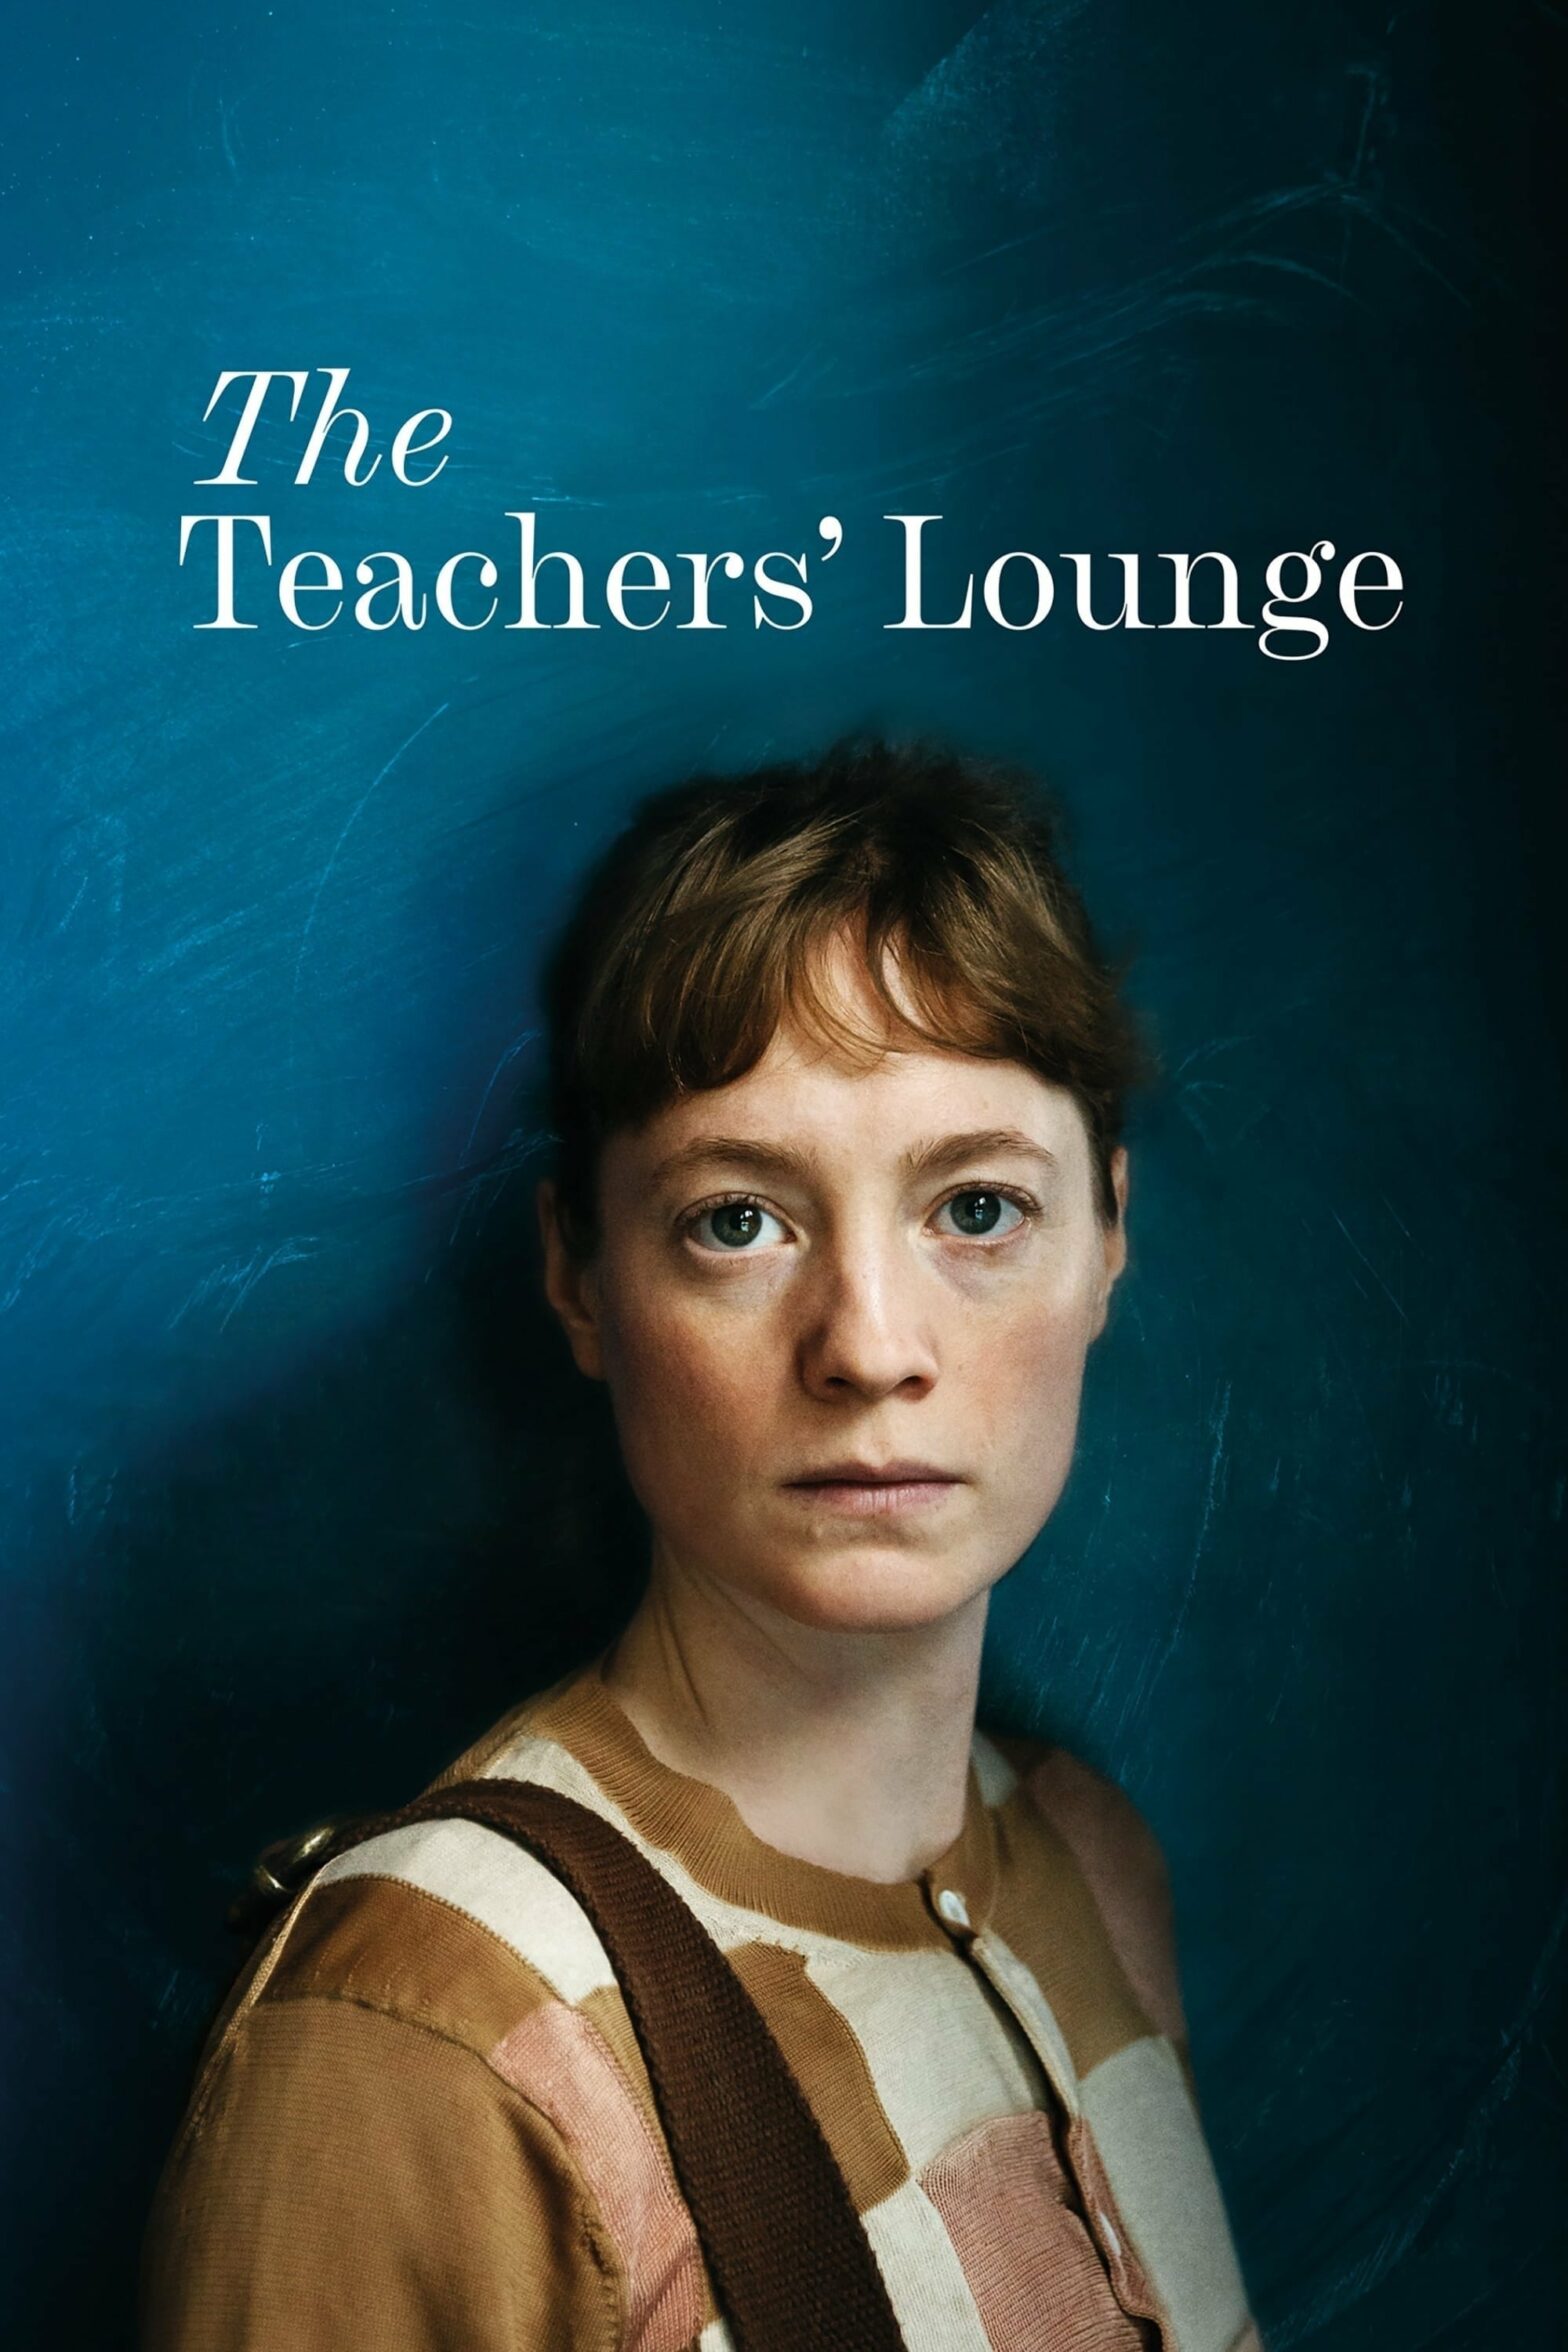 Poster for the movie "The Teachers’ Lounge"